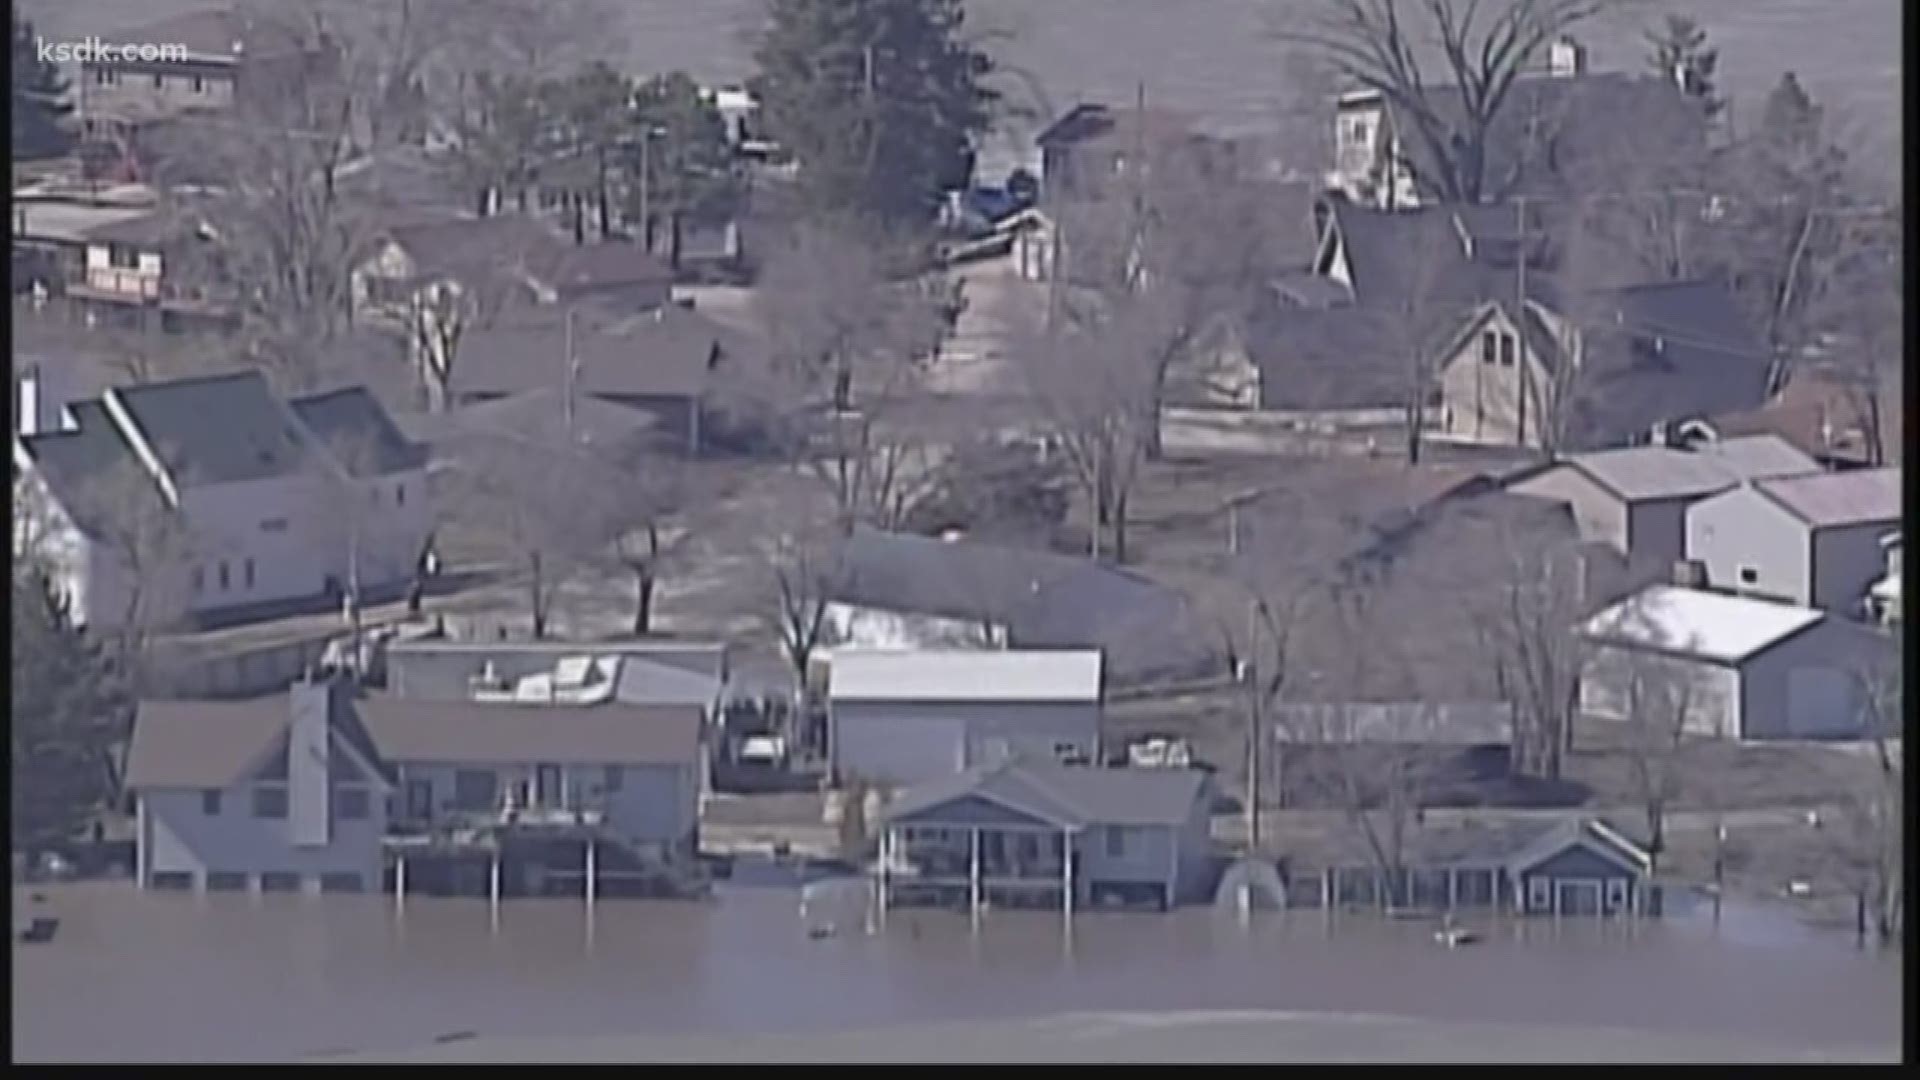 The NWS said this spring could bring historic flooding to parts of Missouri.